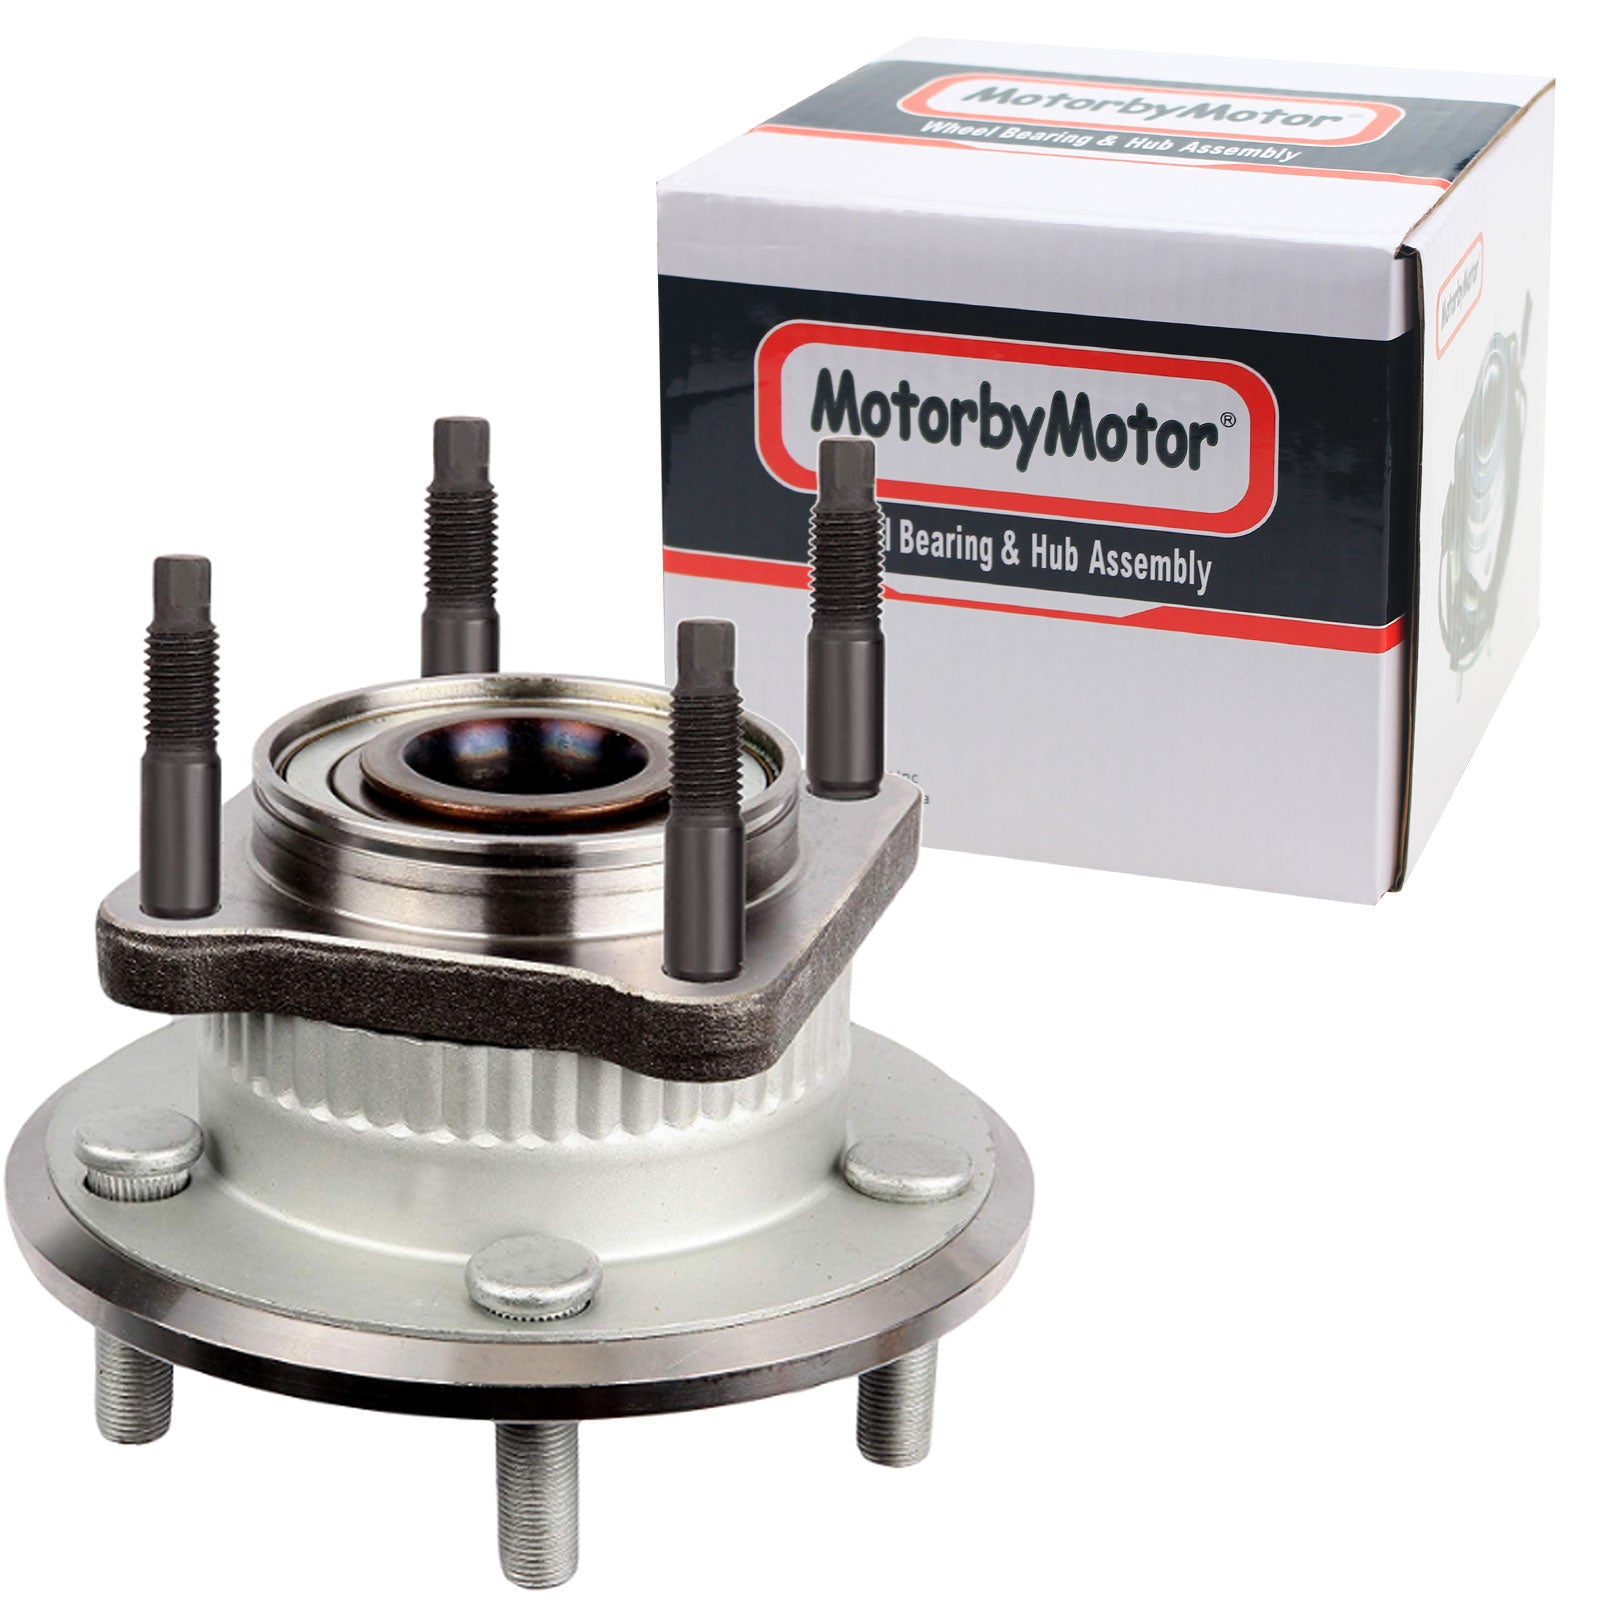 MotorbyMotor 512302 Rear Wheel Bearing and Hub Assembly with 5 Lugs fits for Jeep Commander Grand Cherokee Low-Runout OE Directly Replacement Hub Bearing MotorbyMotor